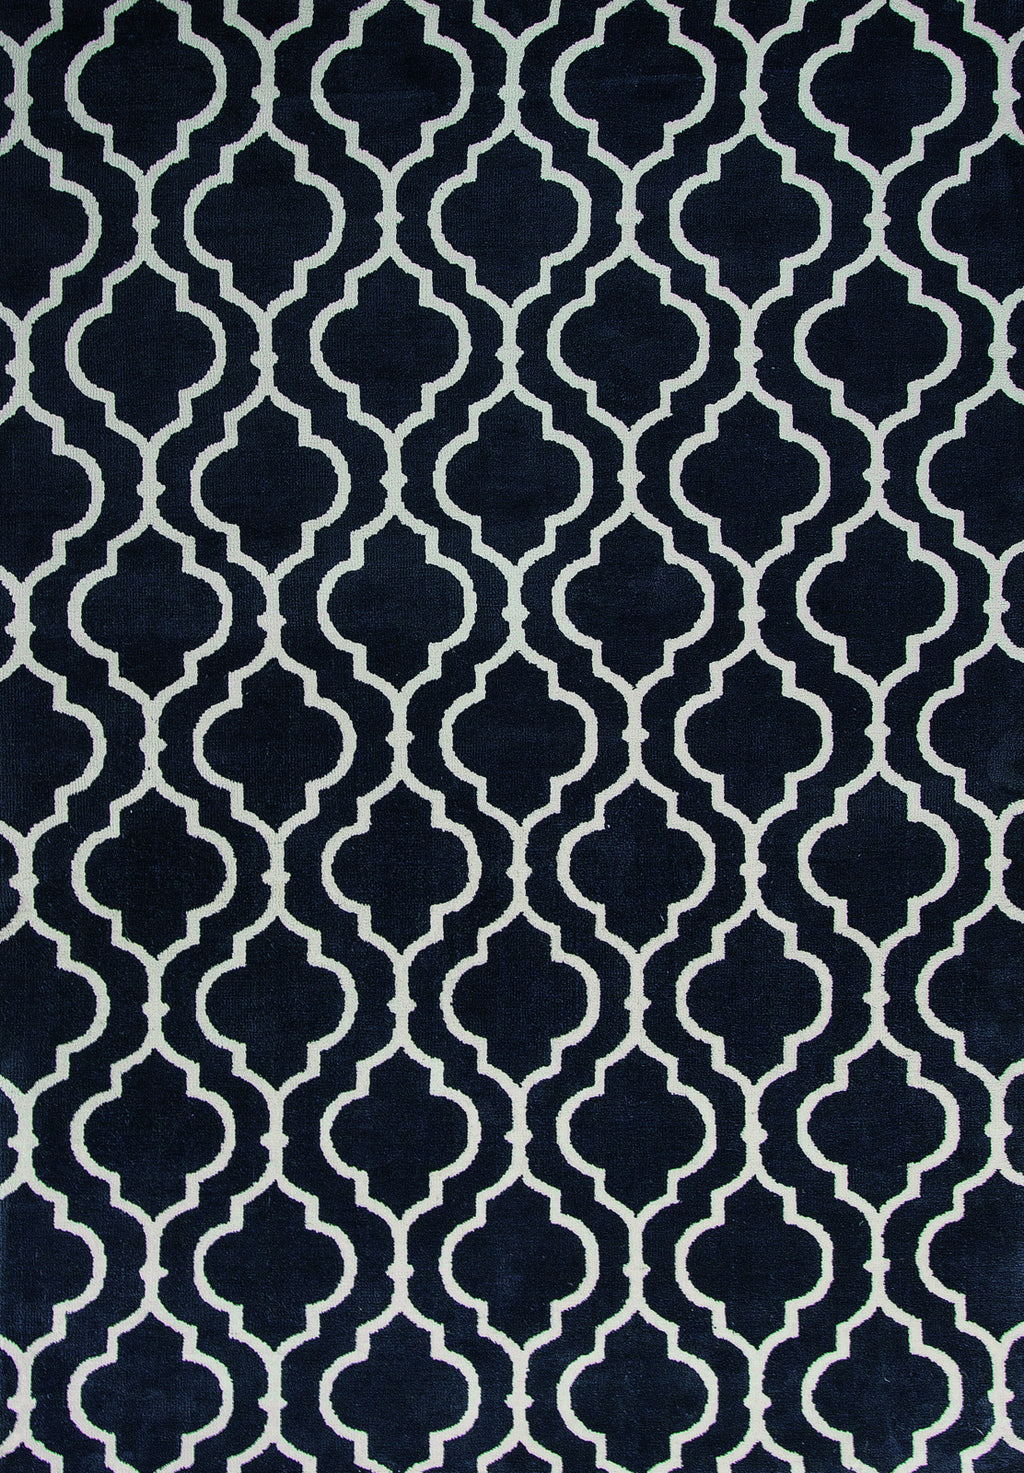 KAS Allure 4067 Charcoal Fiore Area Rug main image